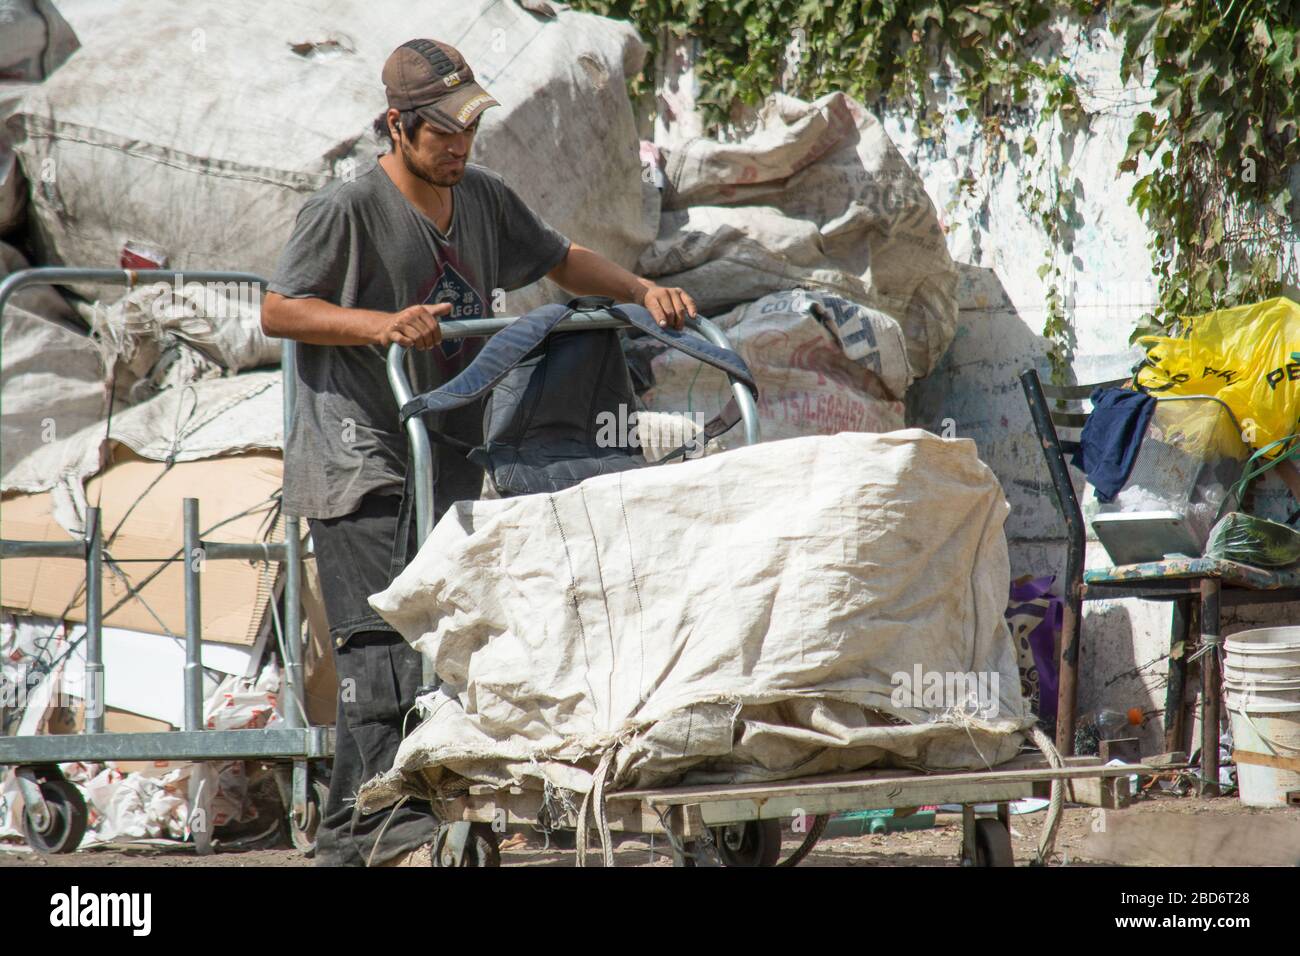 Rosario, Argentina - Julio 25, 2019: Homeless people living in the streets Stock Photo